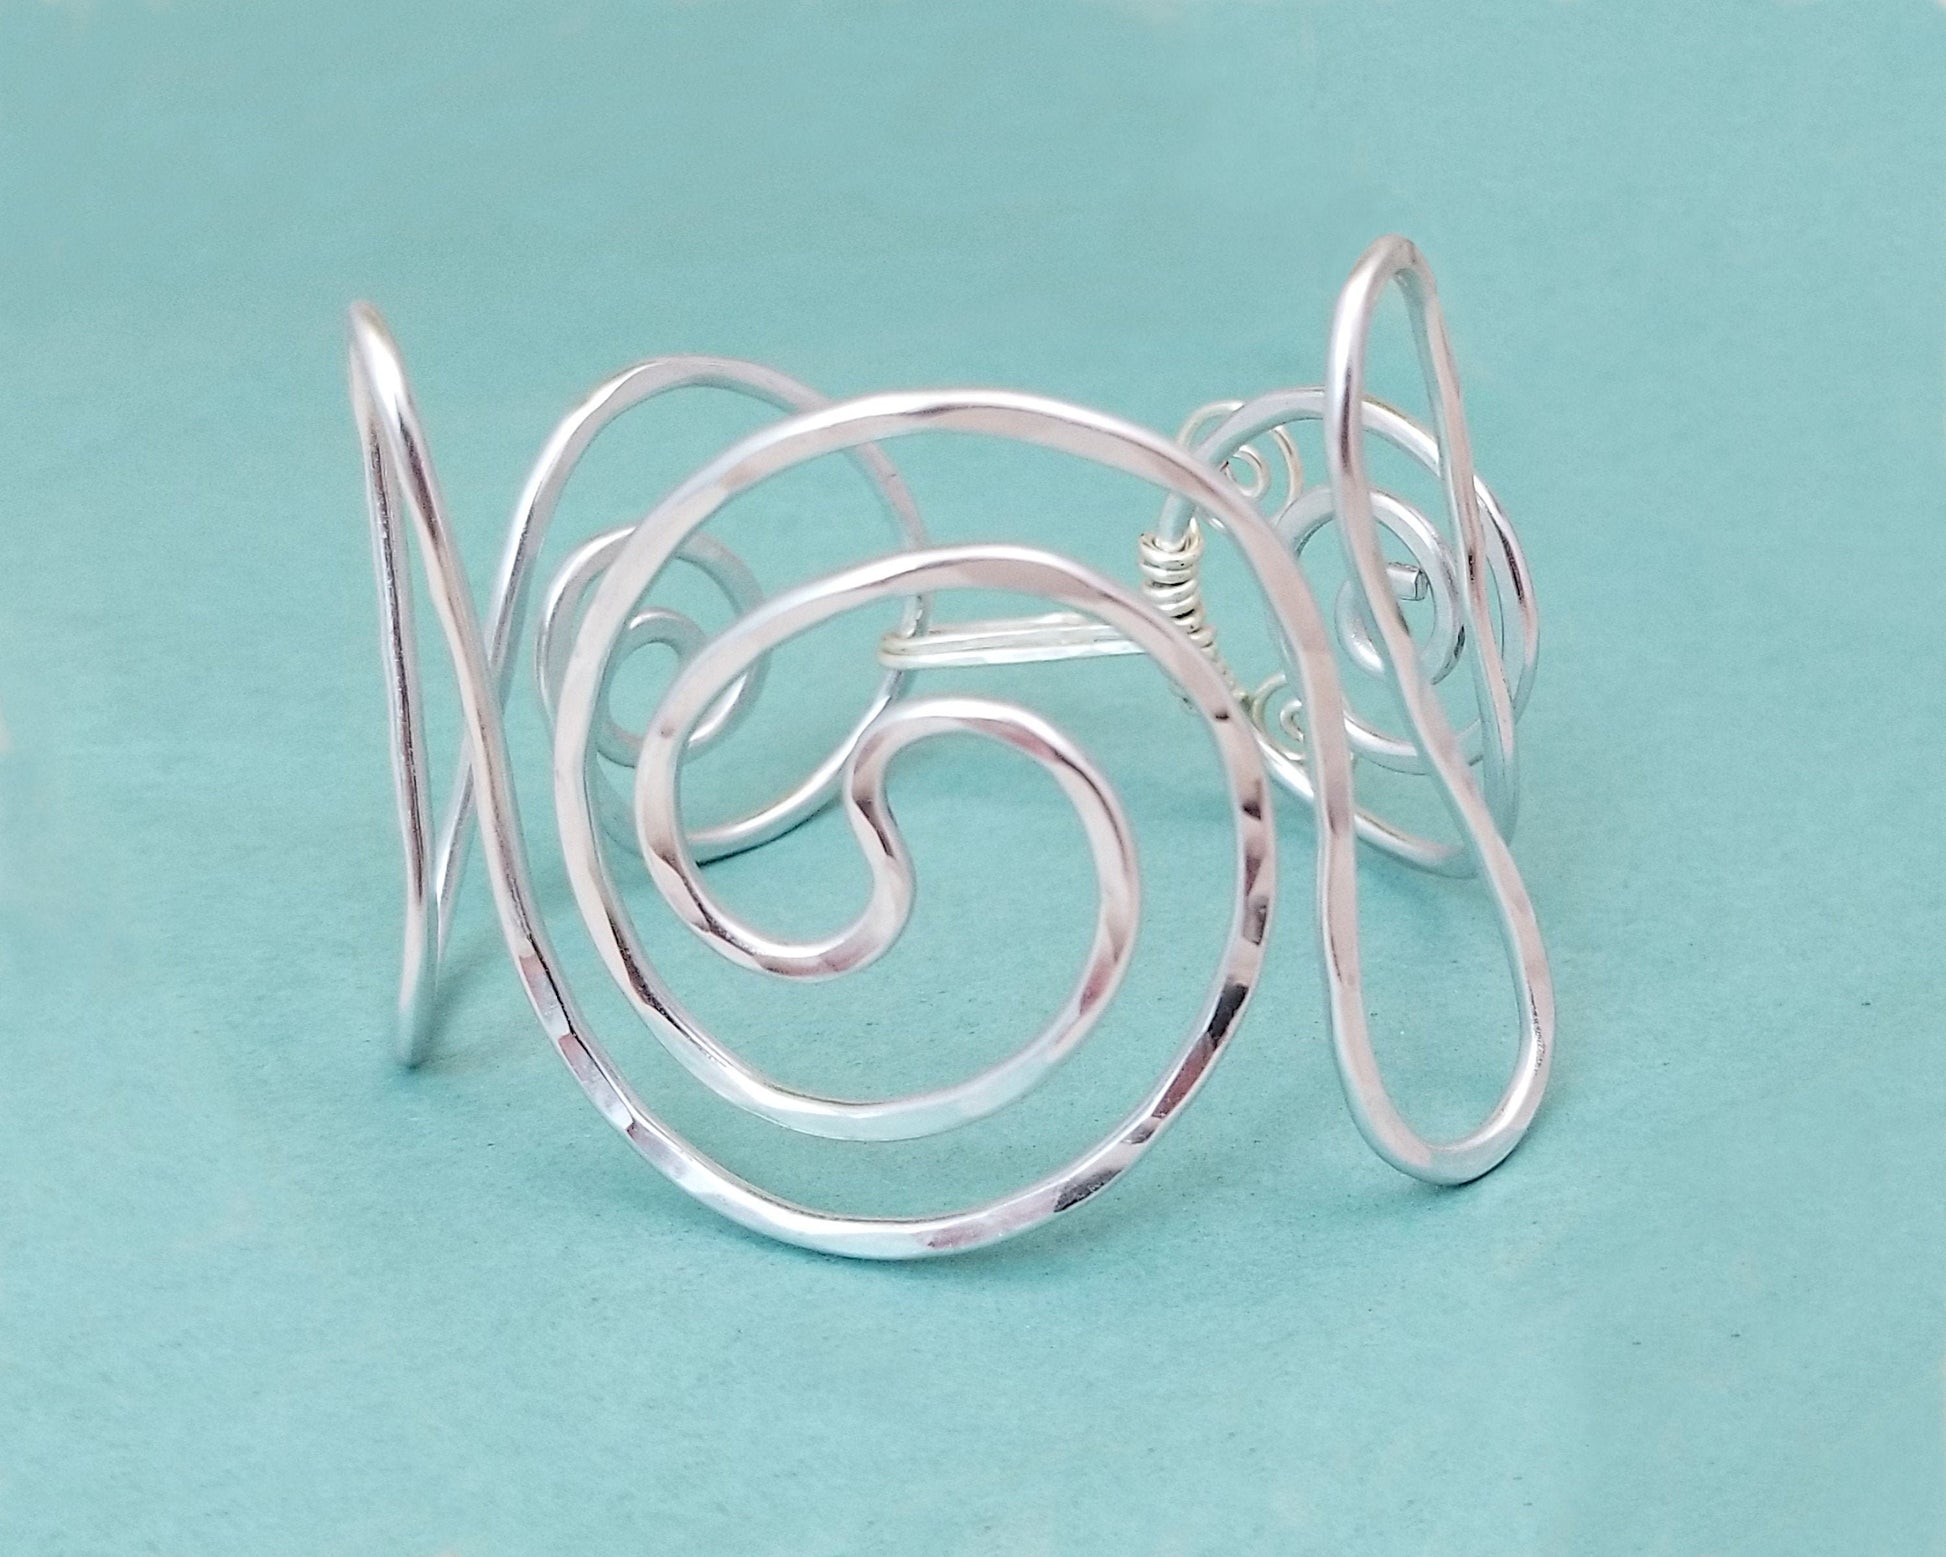 Minimalist Statement Cuff, Central Spiral Design, Hammered Wire, Adjustable, Lightweight, Choice of Colors and Metals